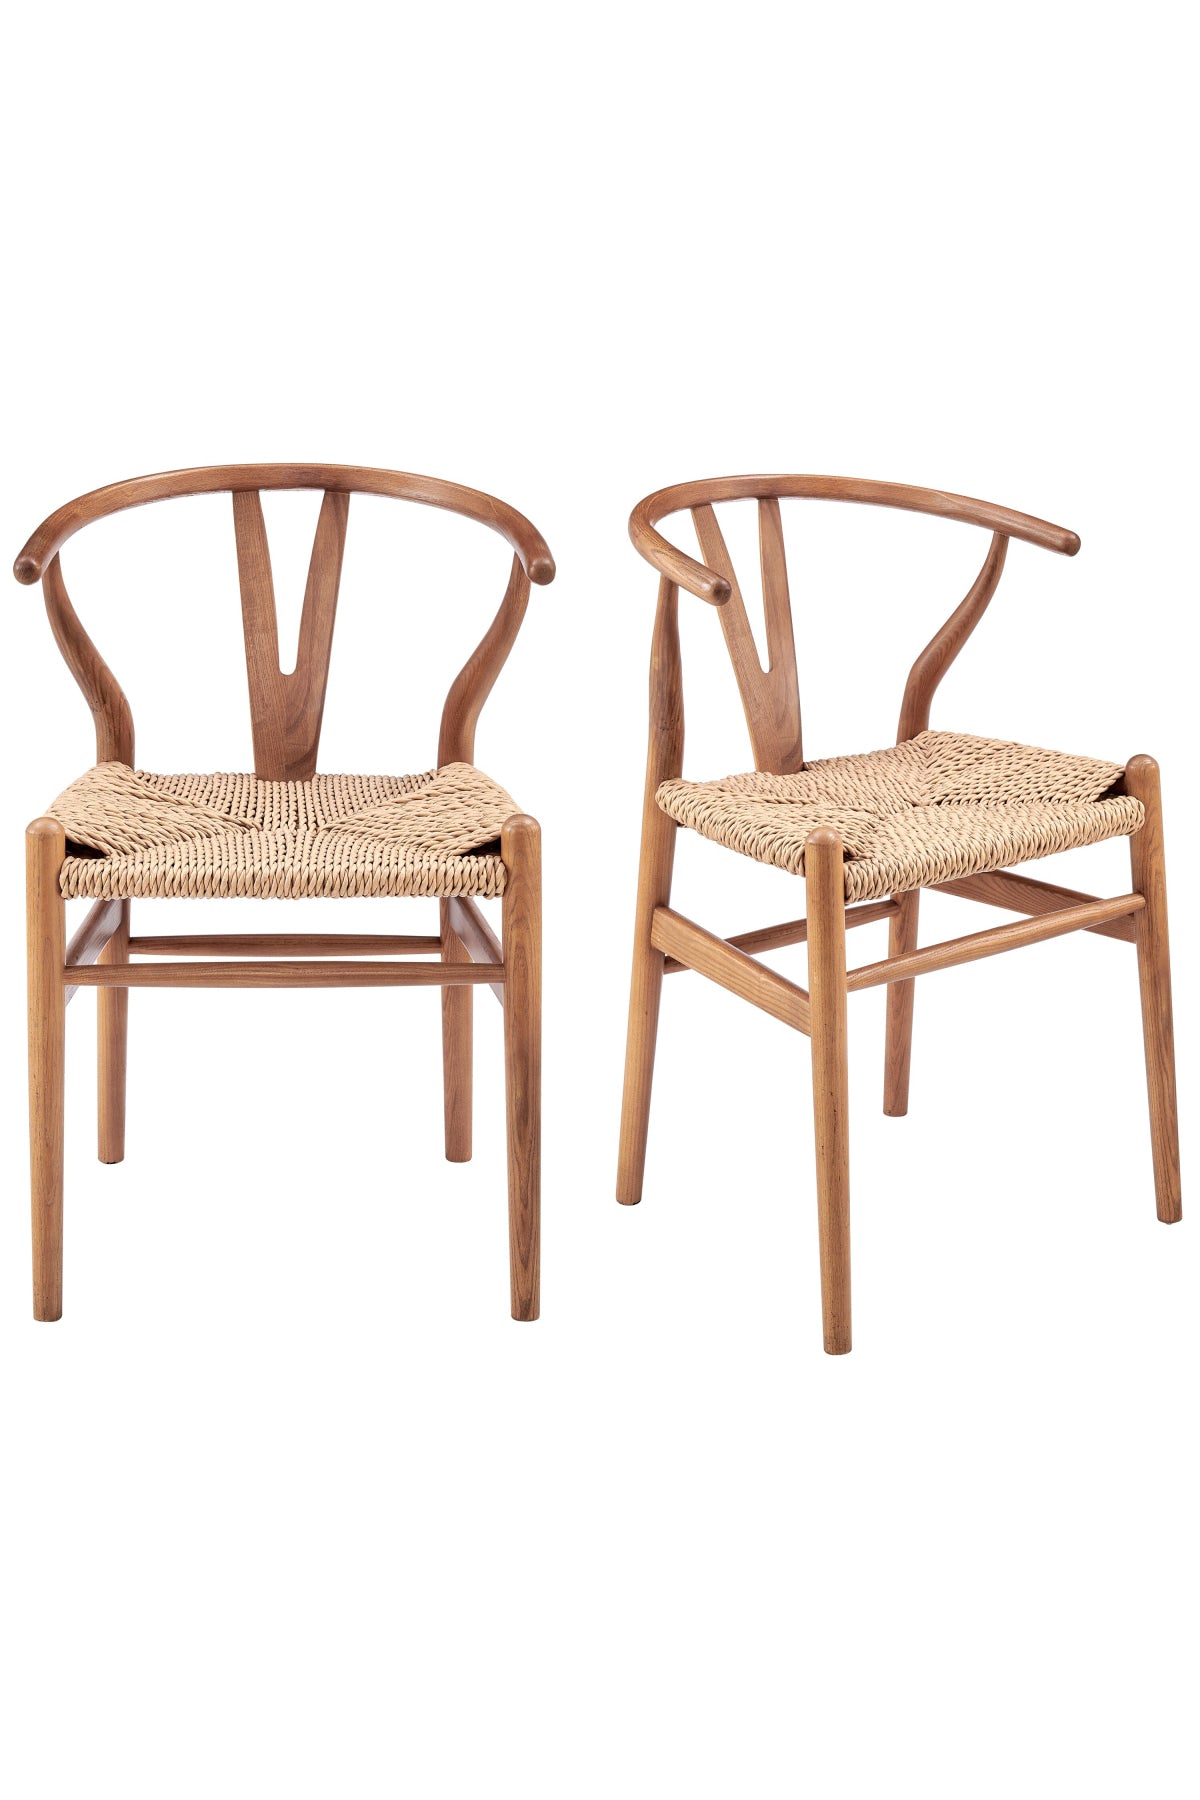 Fowler Outdoor Side Chair - Set of 2